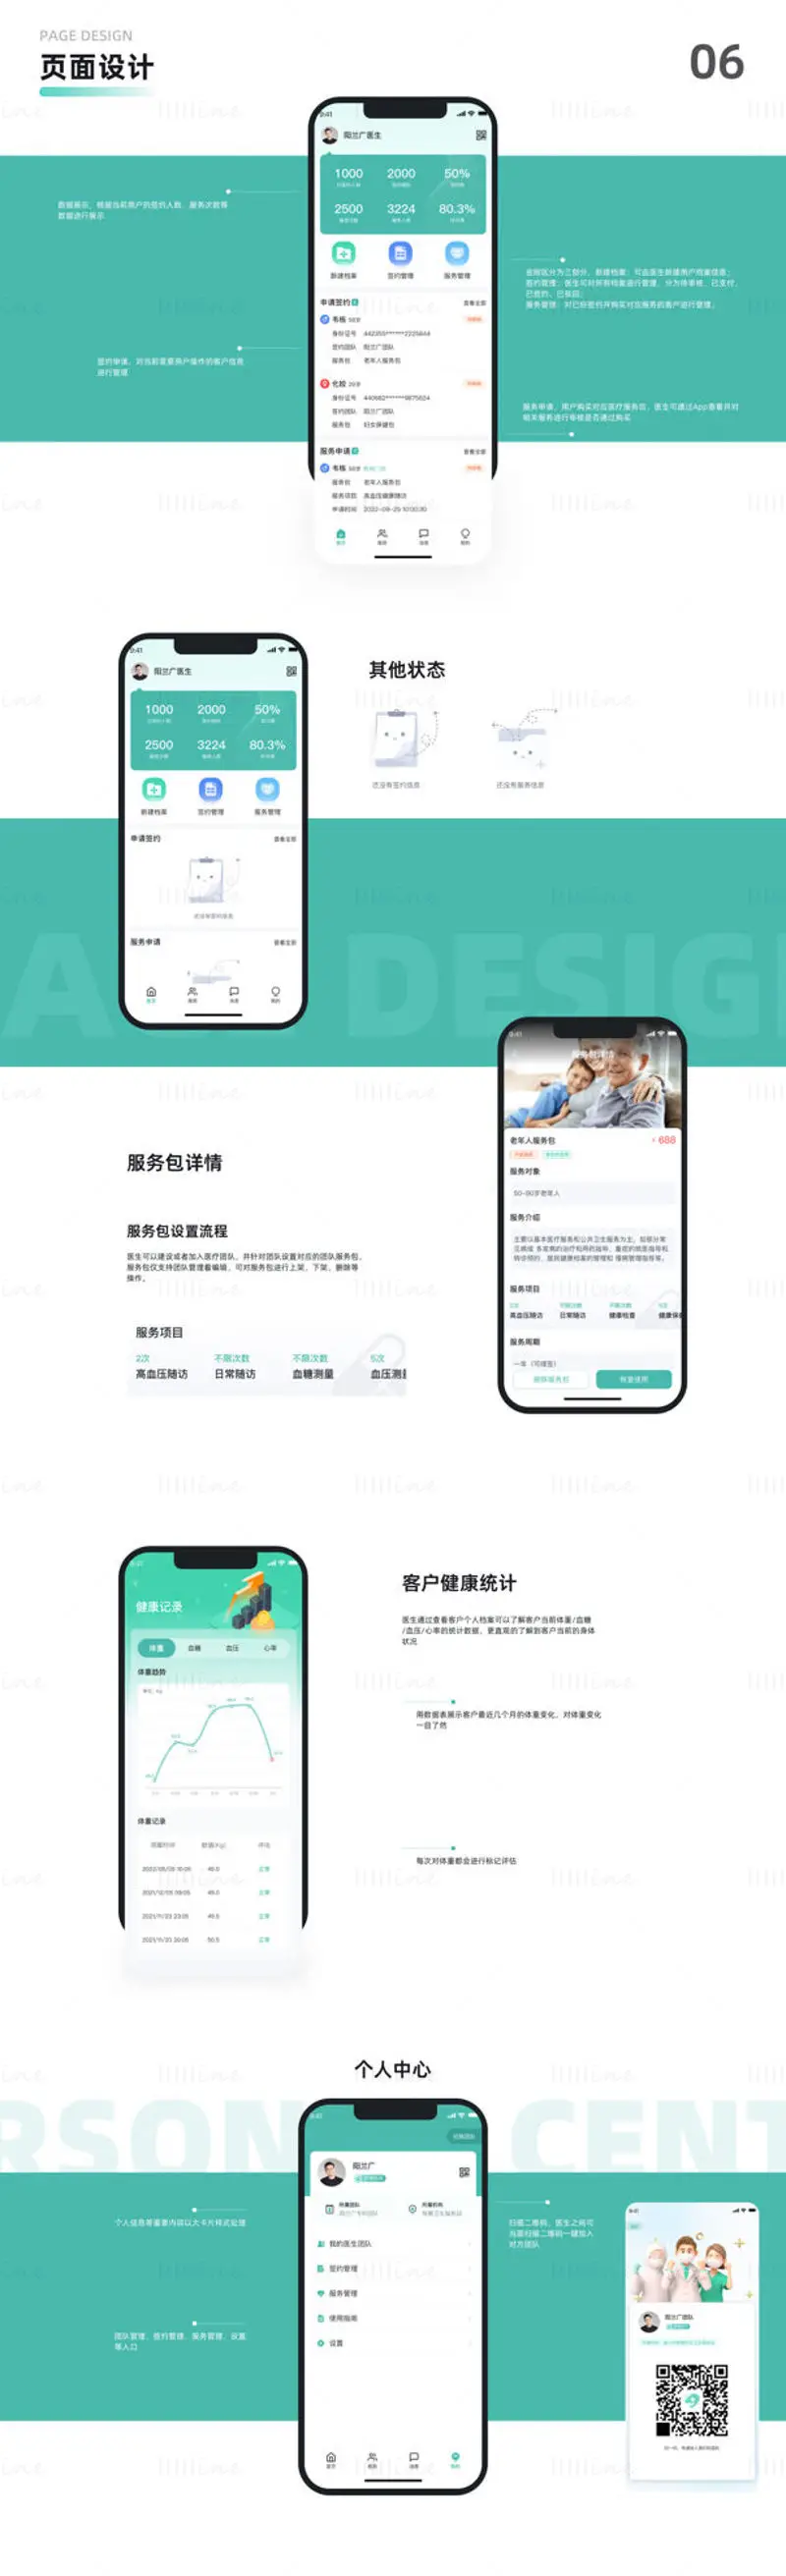 Family doctor (doctor terminal) APP interface design sketch template